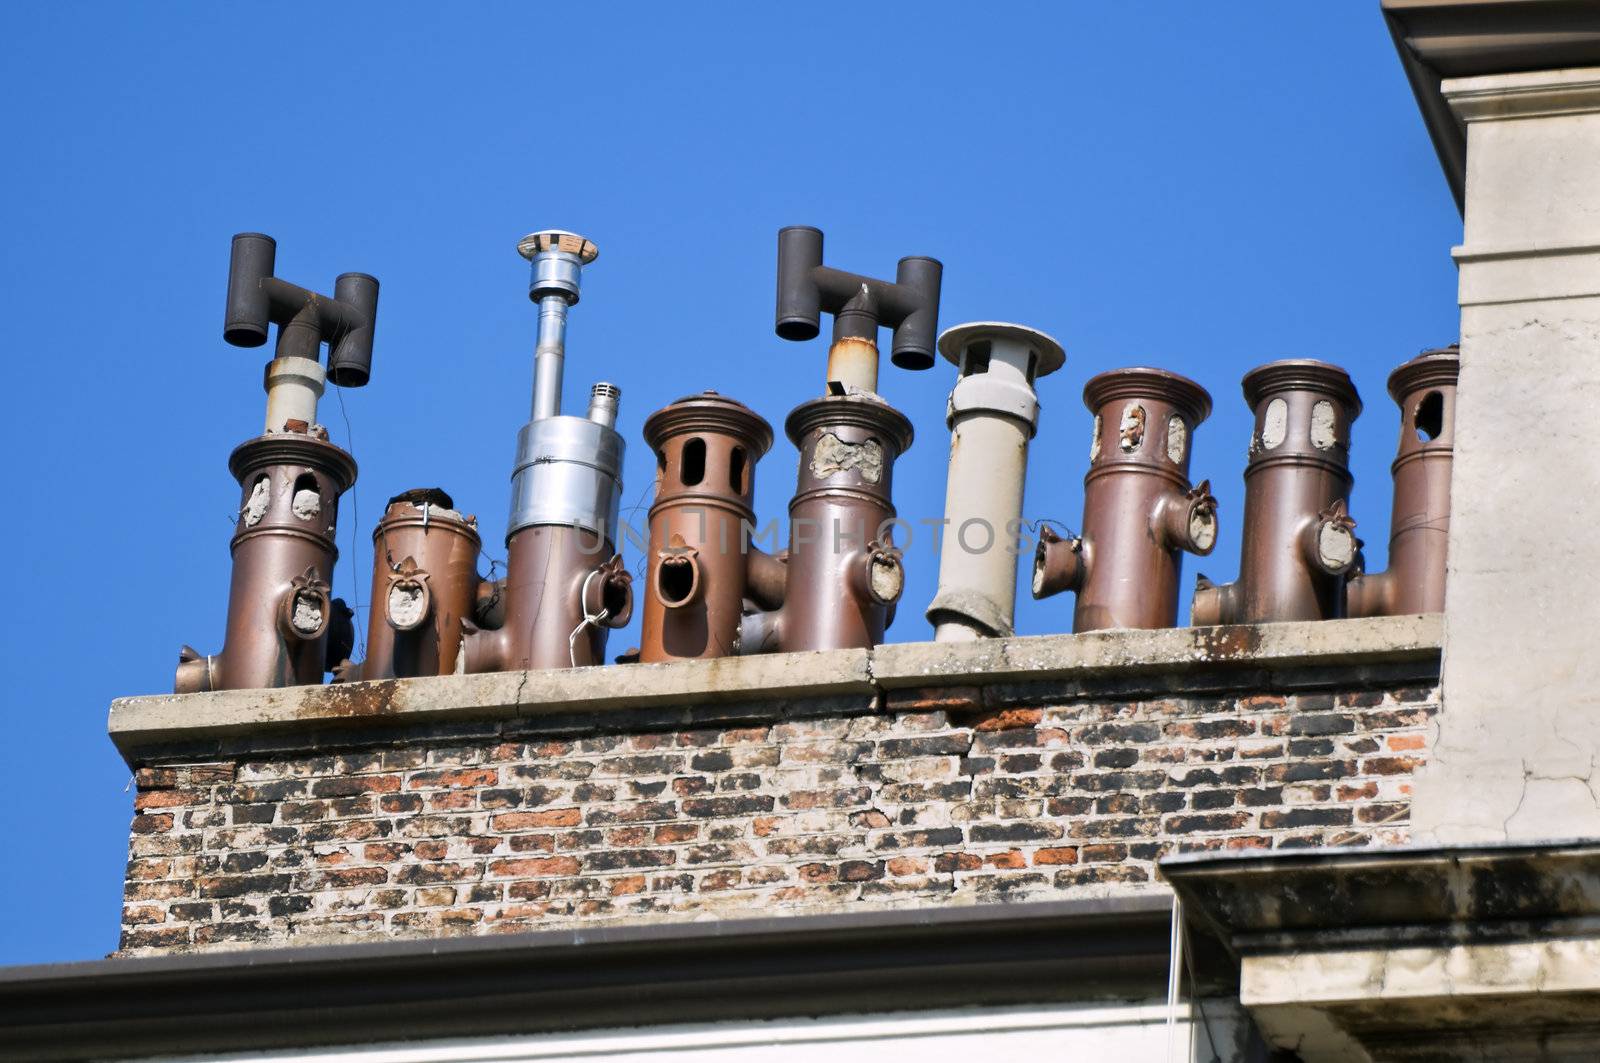 Line of old chimneys on a building rooftop agaist a blue sky